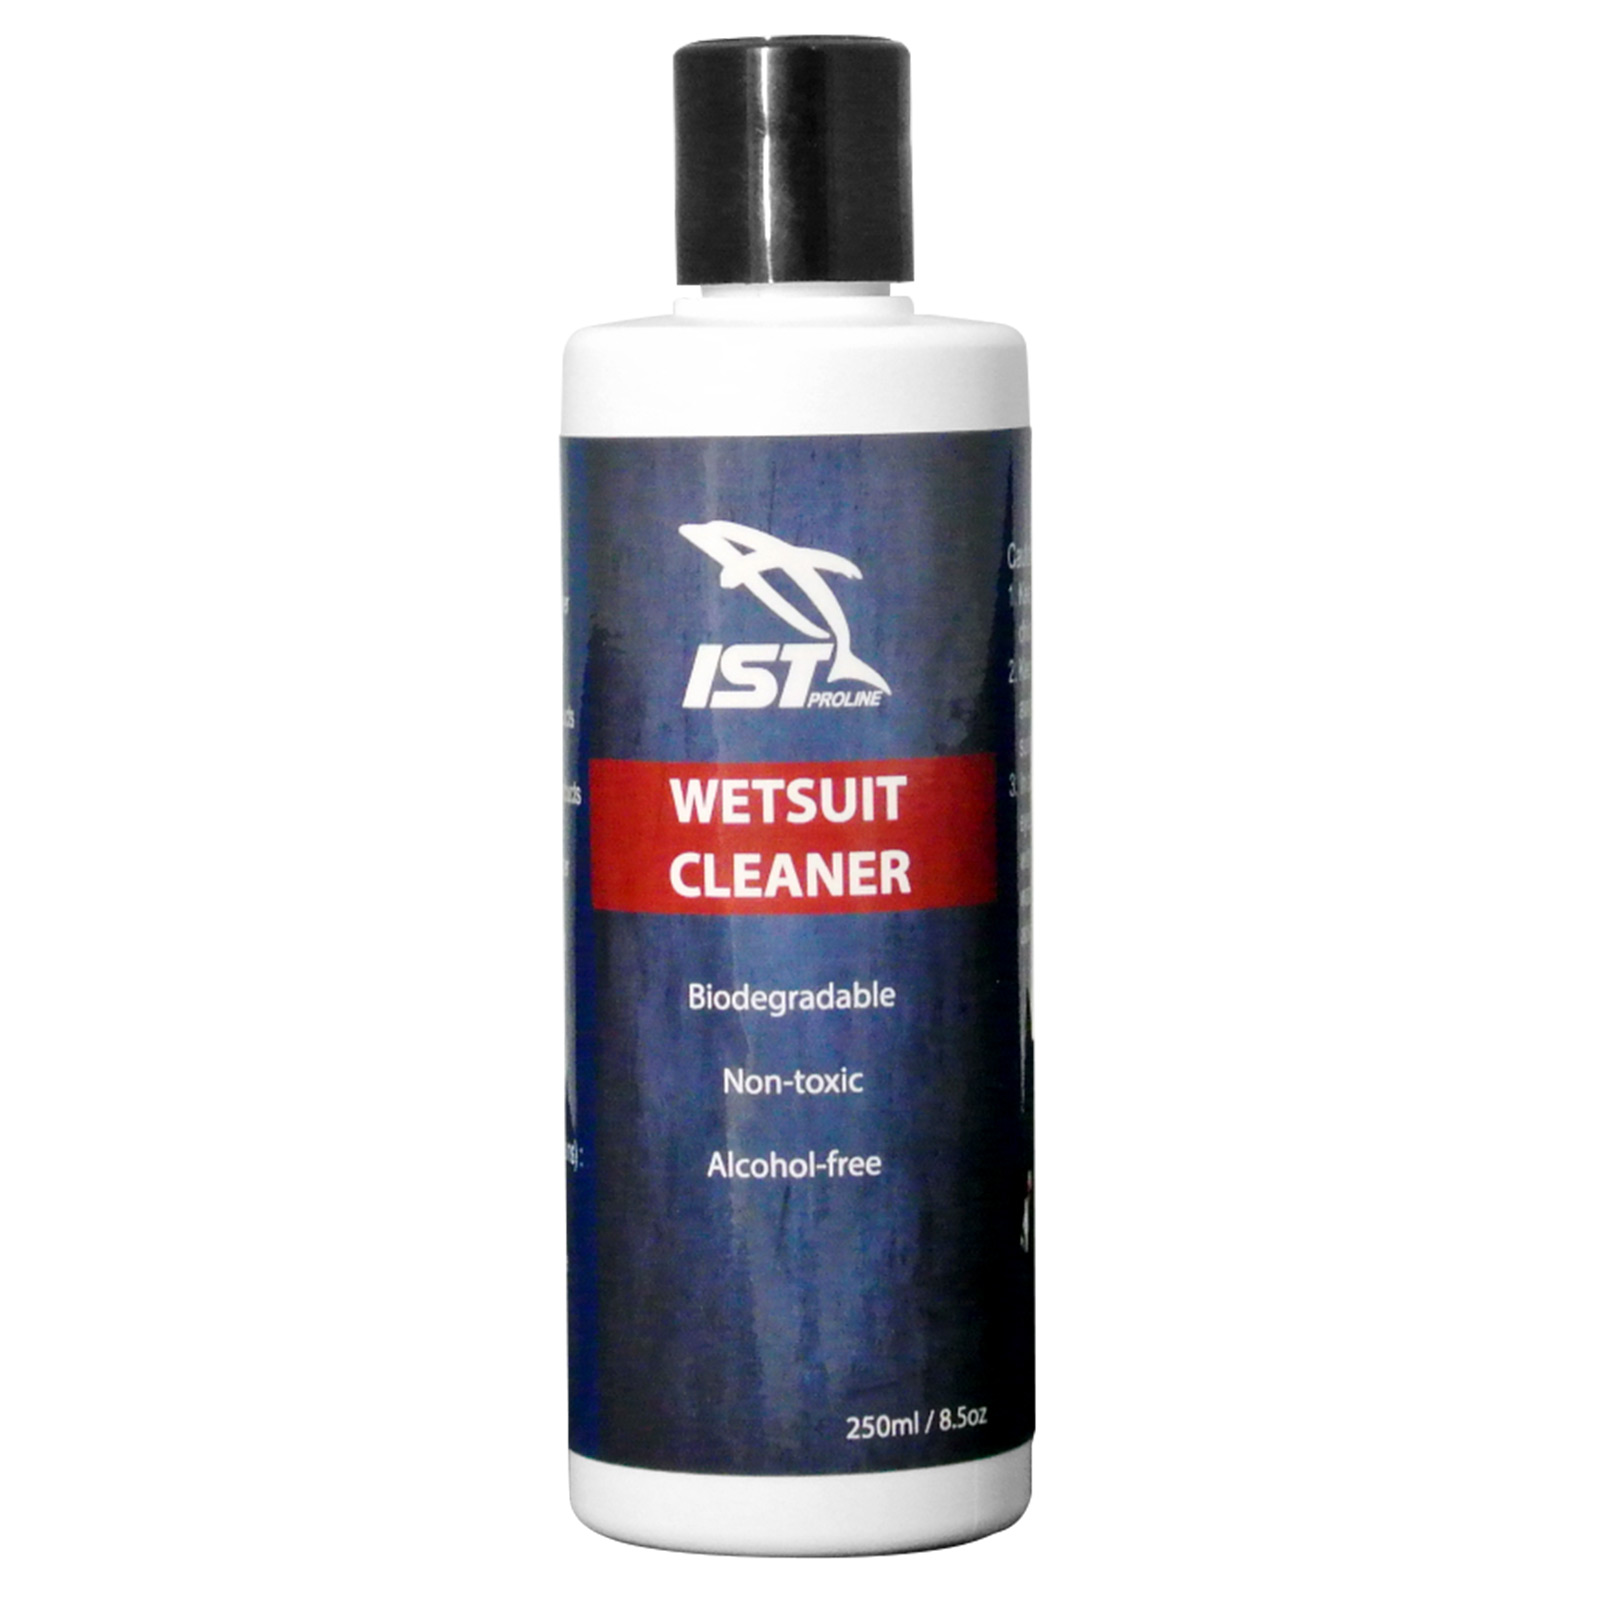 WETSUIT CLEANER